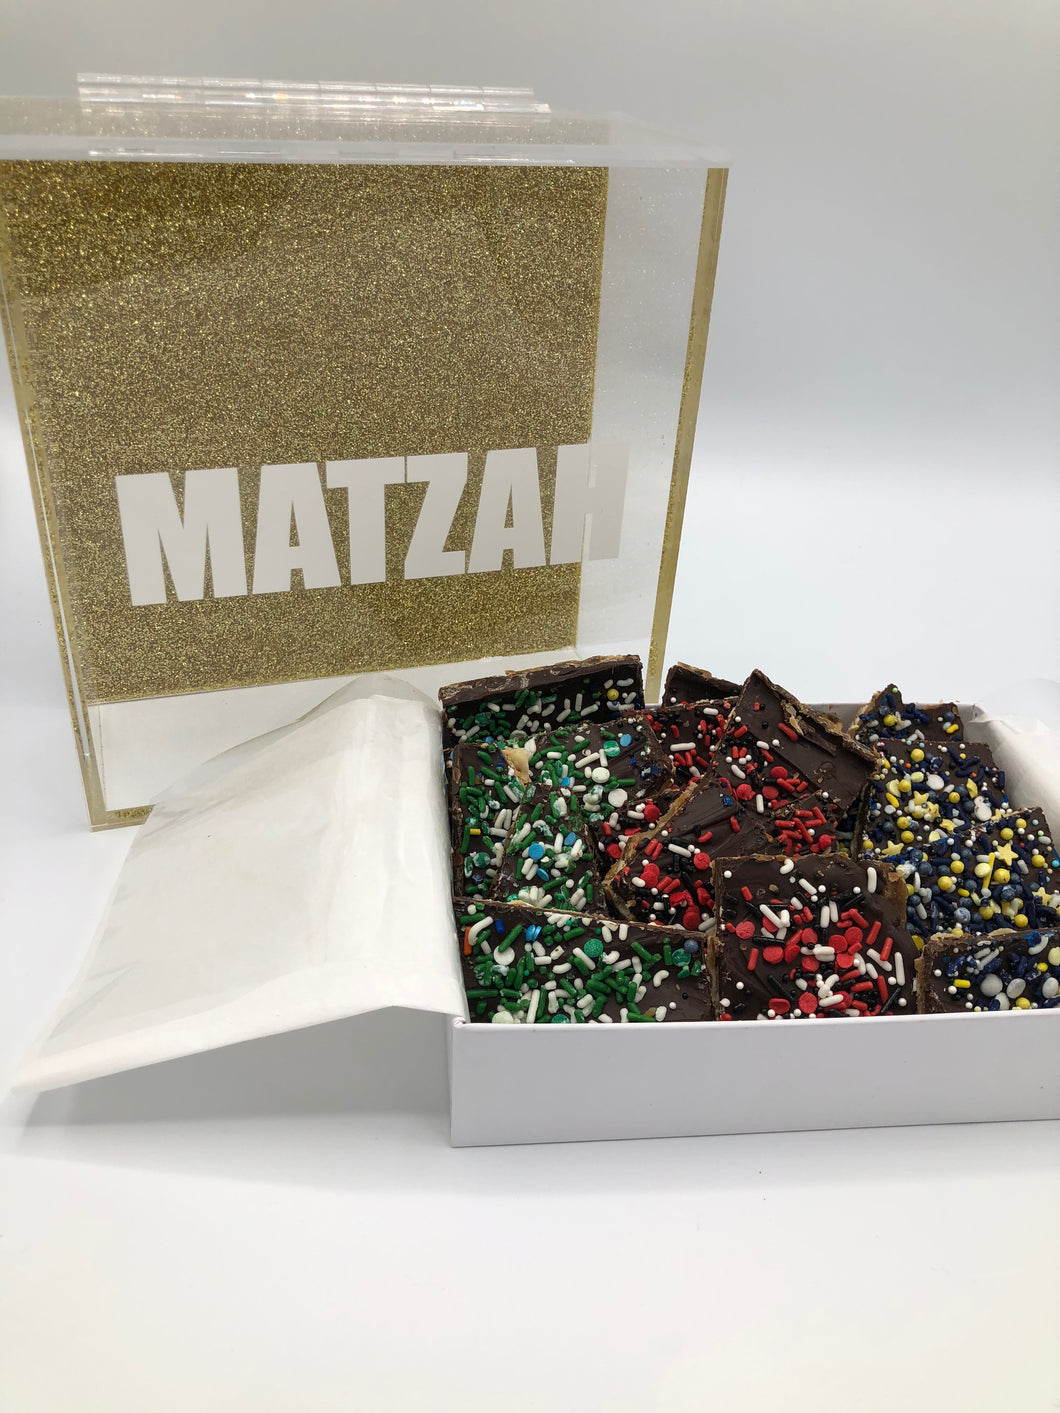 CARMELIZED MATZVAH CRUNCH - Out of the Box NY Gifts